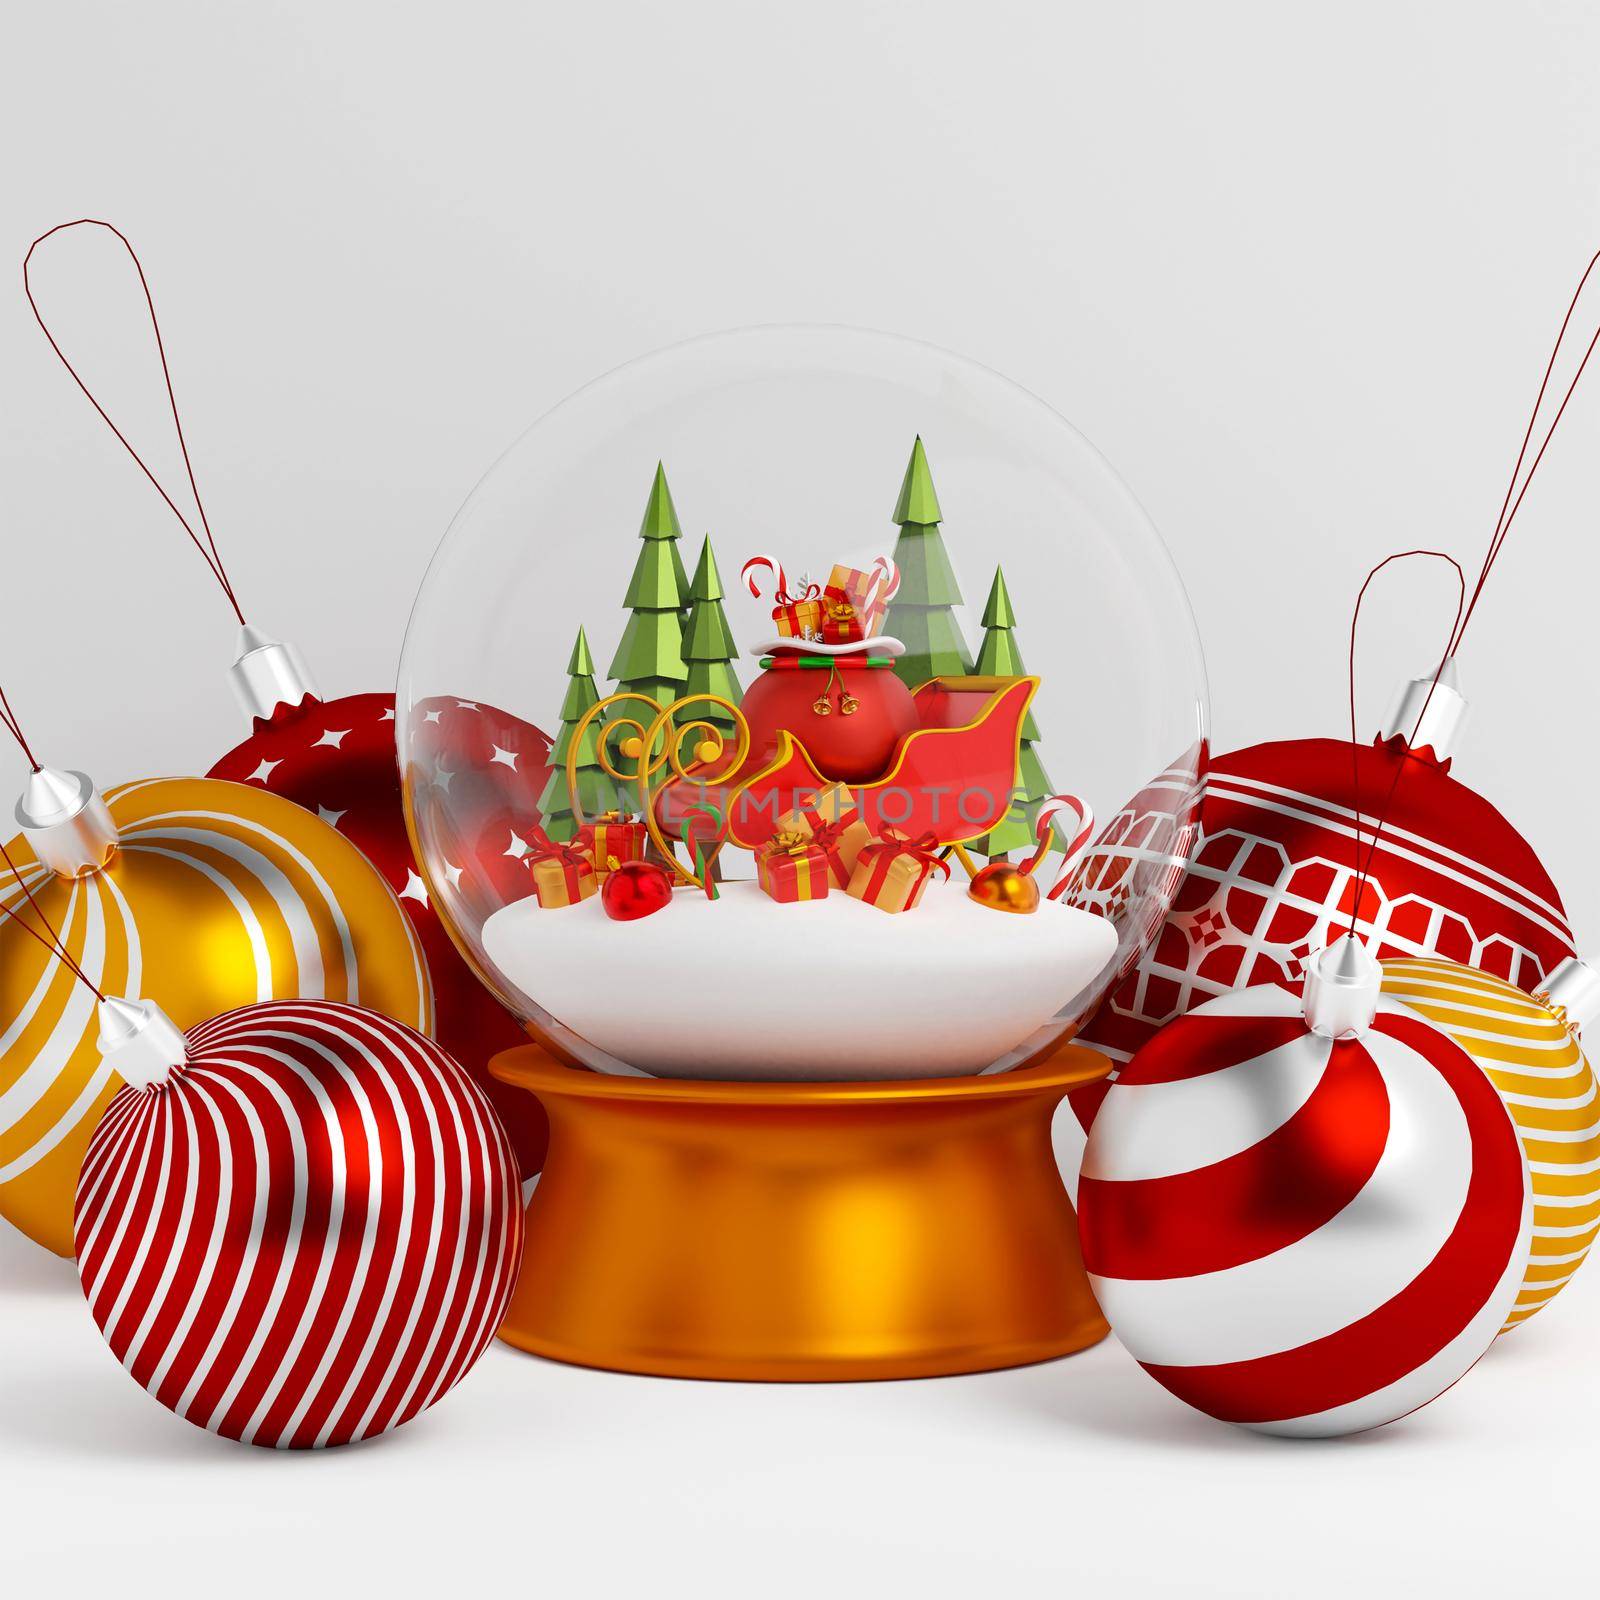 Gift bag on sleigh in Christmas globe with Christmas ball, 3d illustration by nutzchotwarut